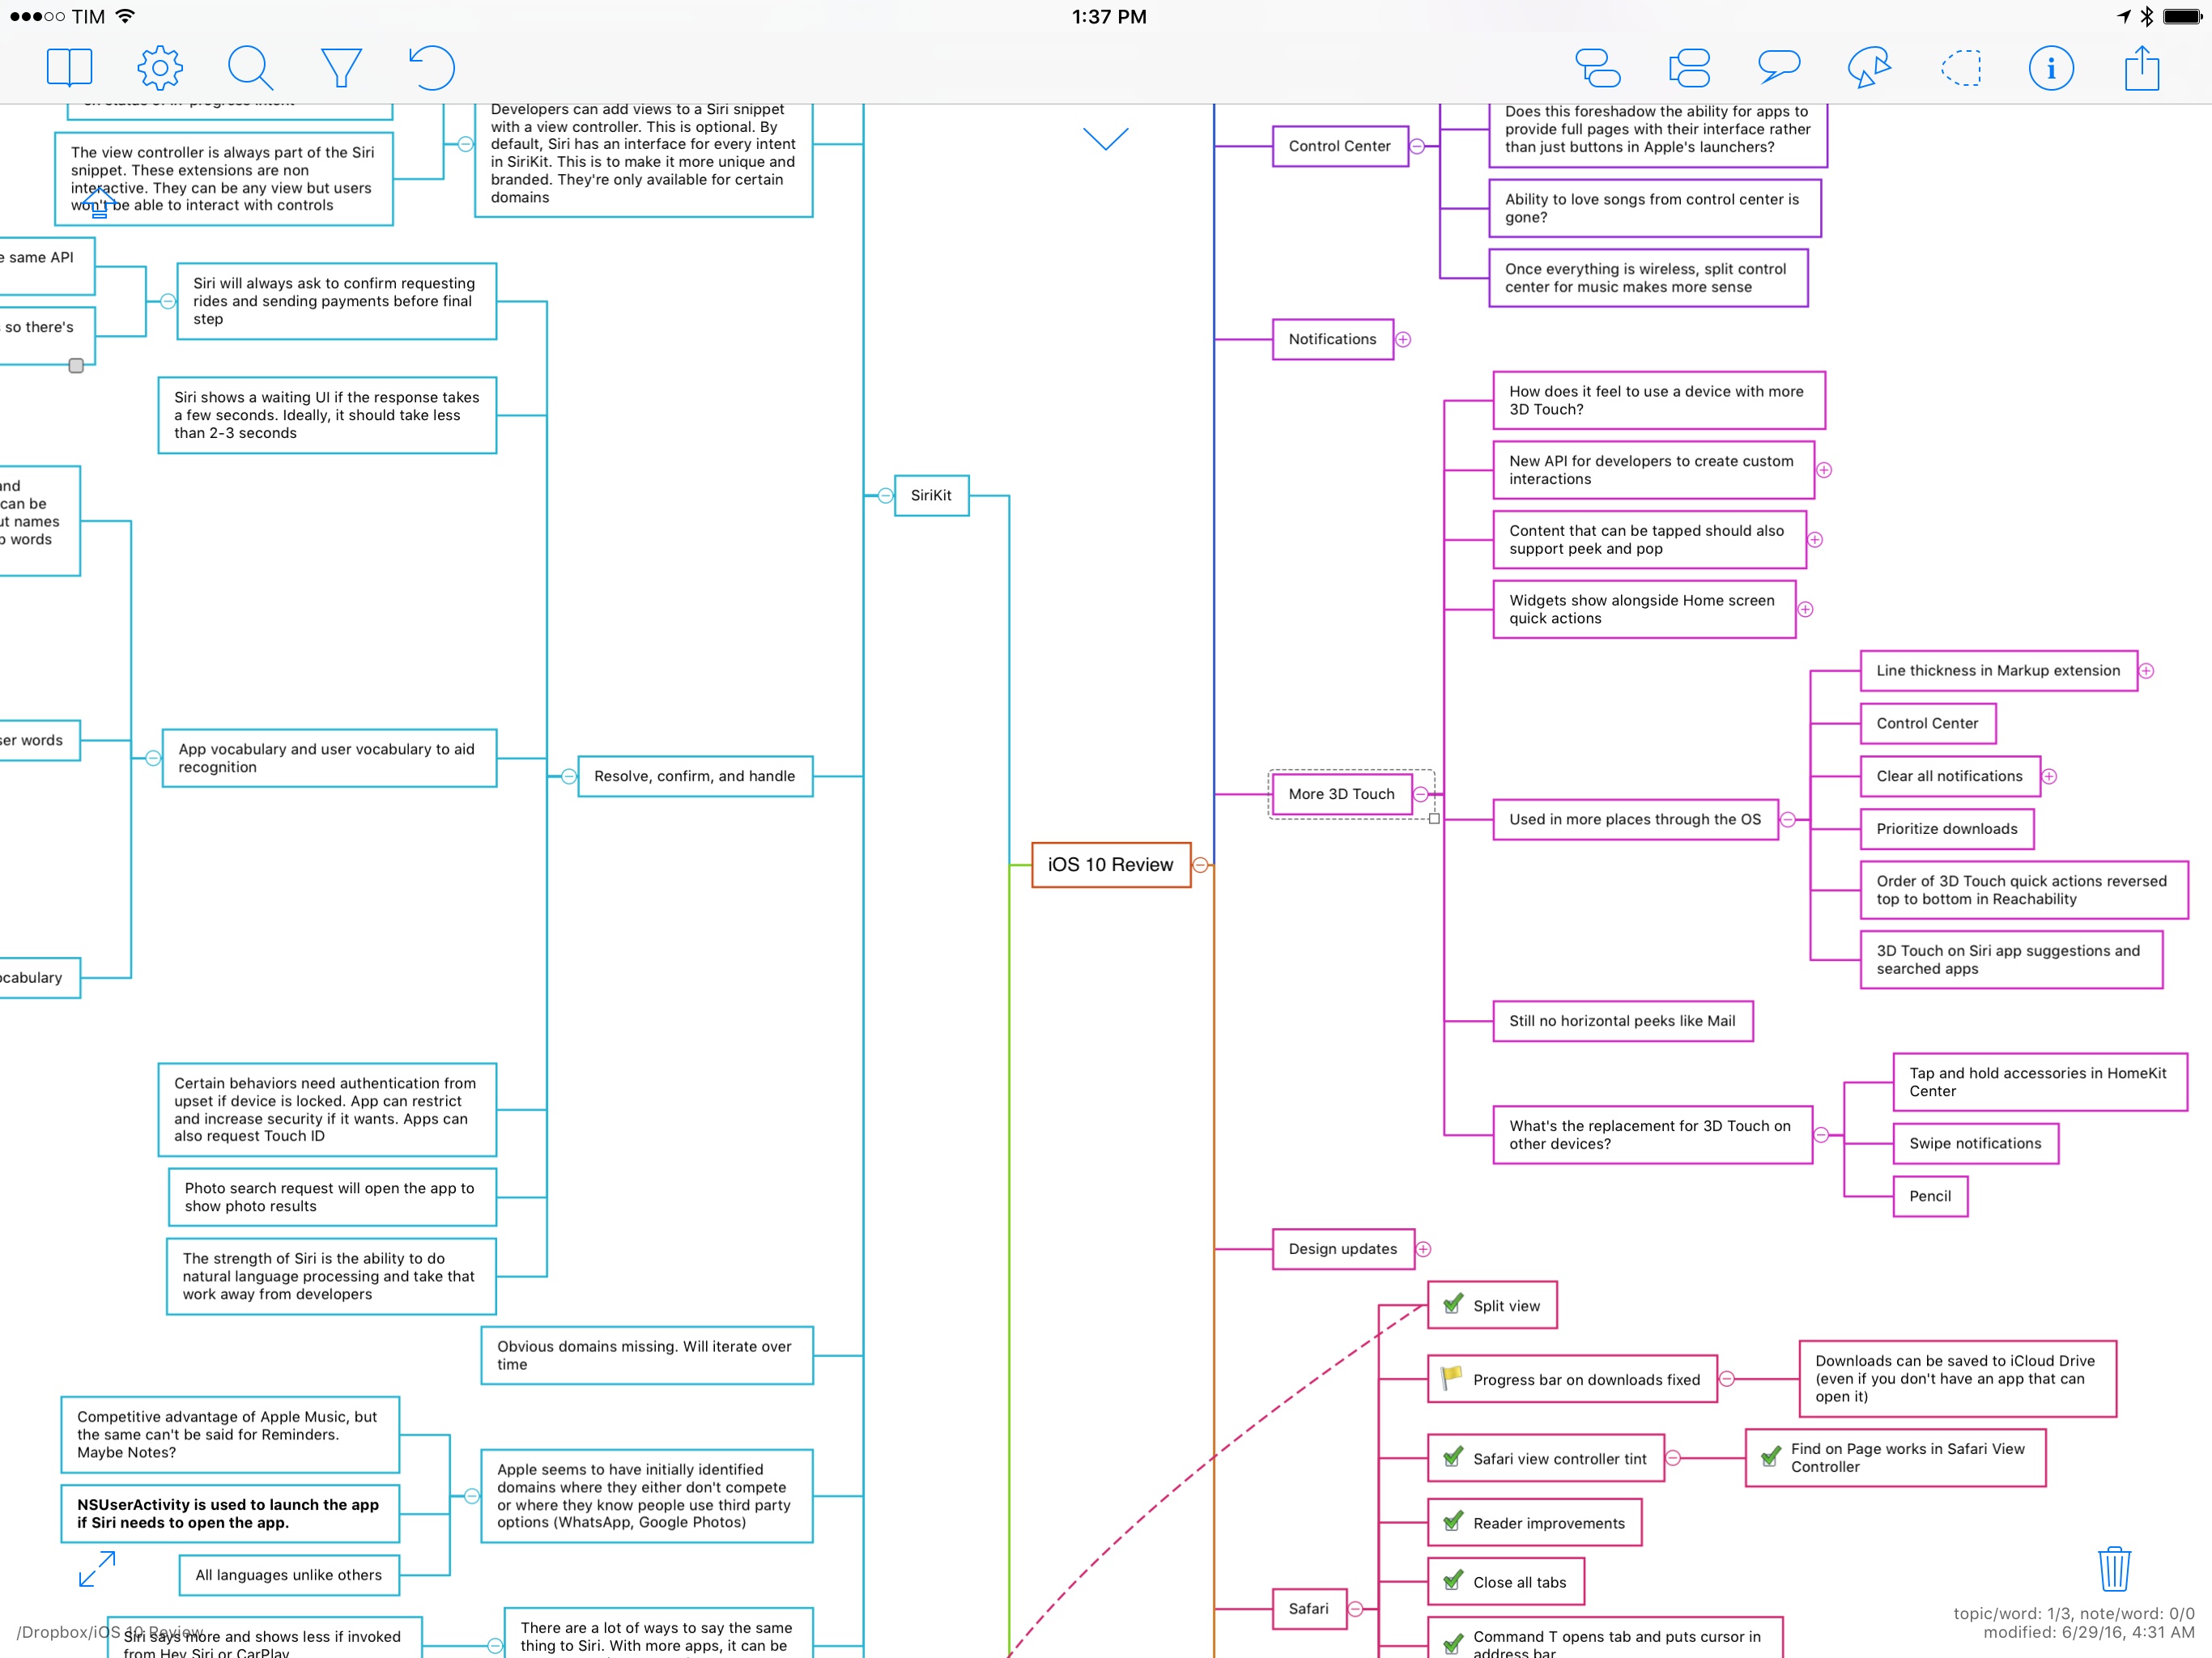 My iOS 10 review mind map in iThoughts.